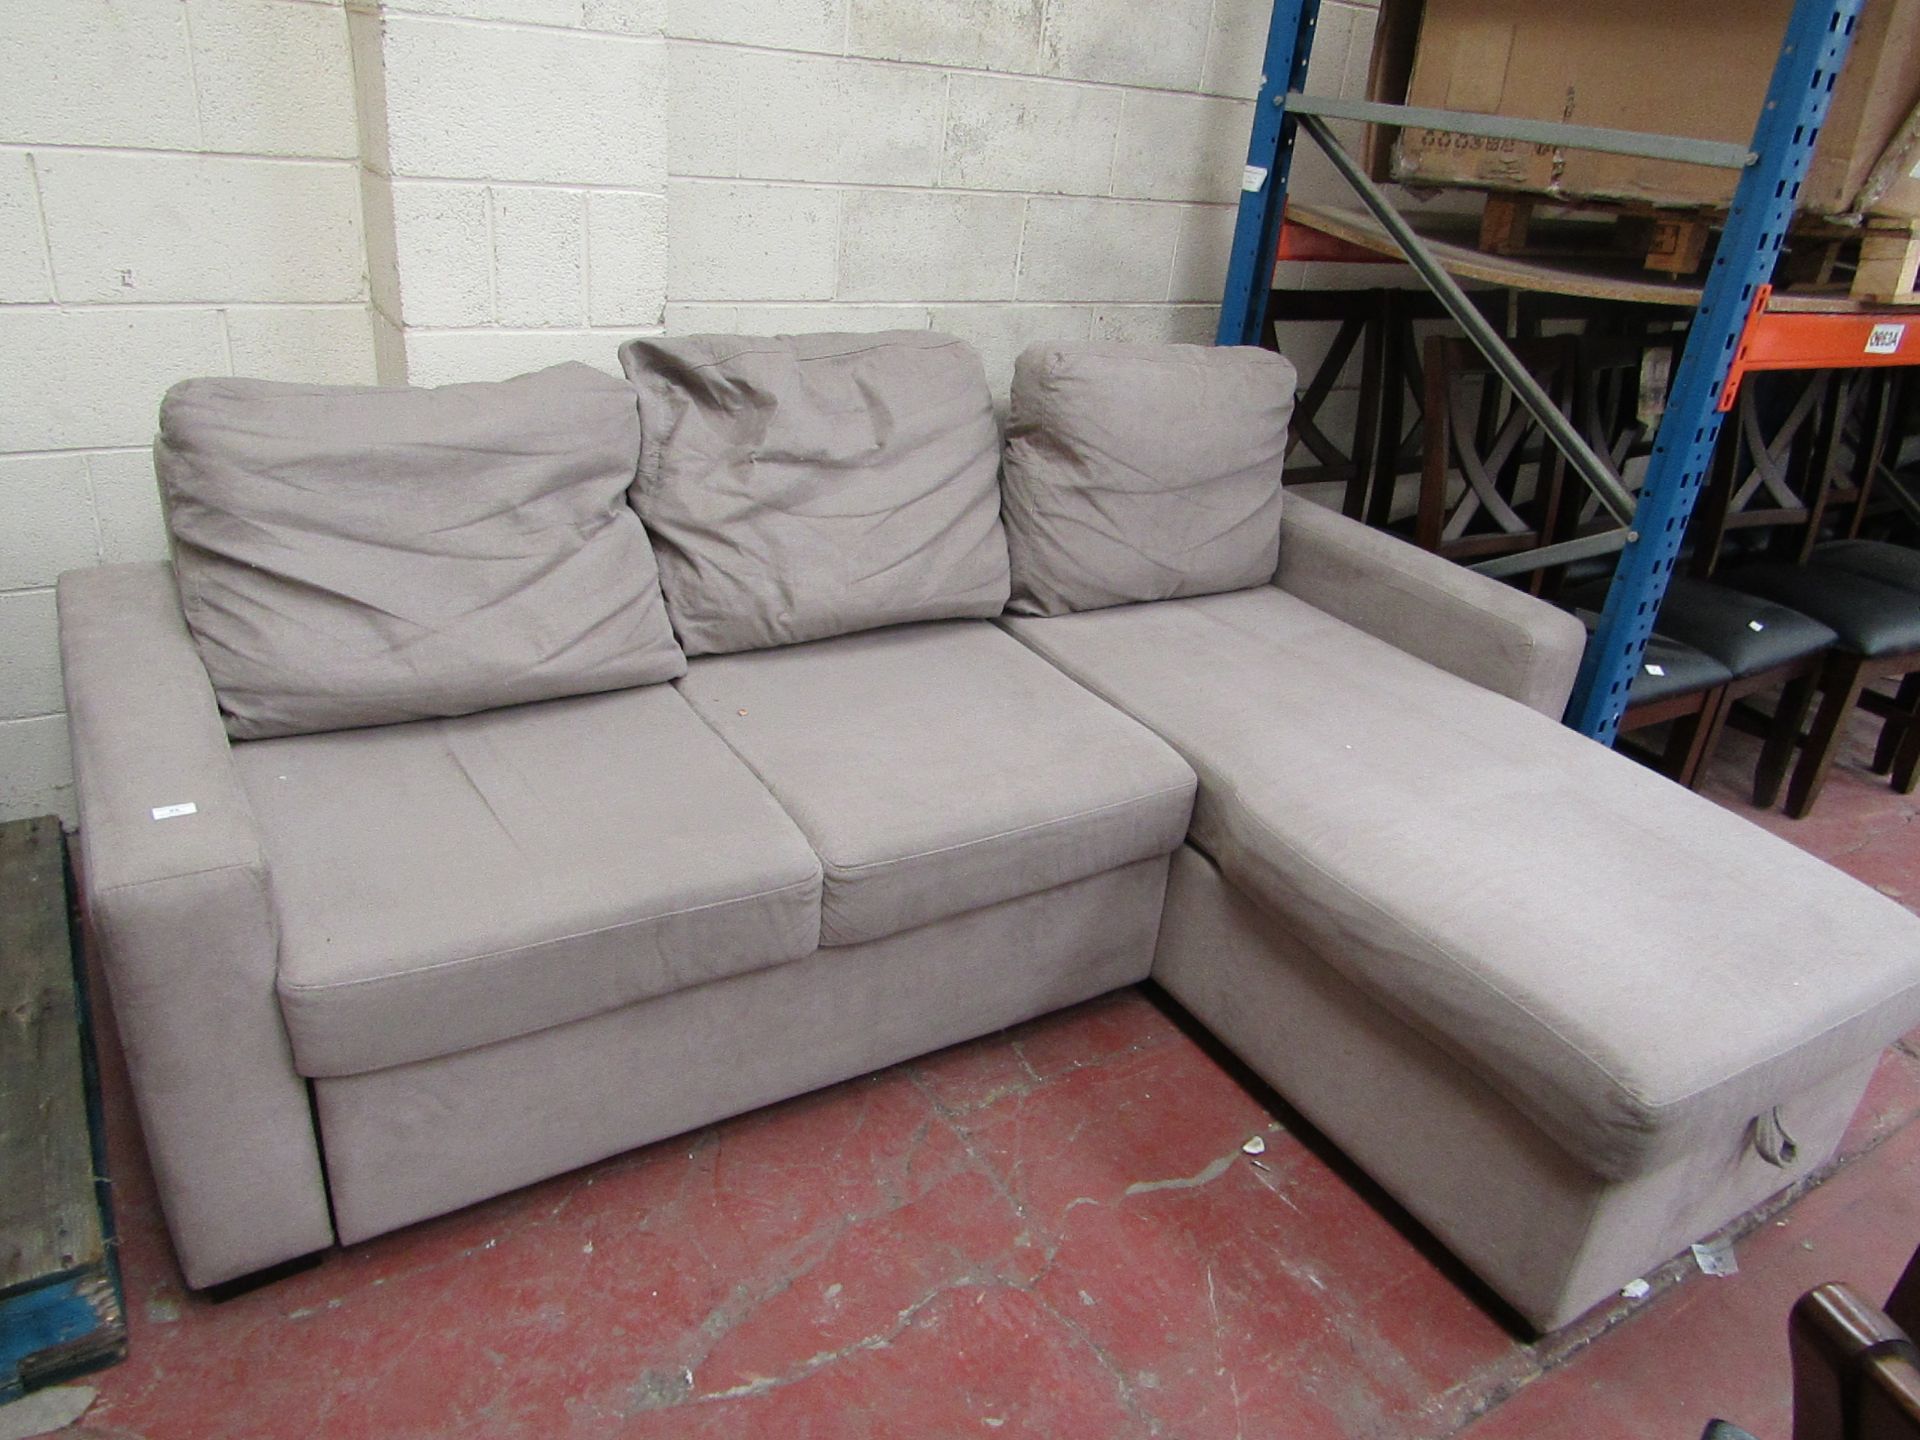 Polaski fabric pull out sofa bed with chaise pull up storage, one of the back cushions needs